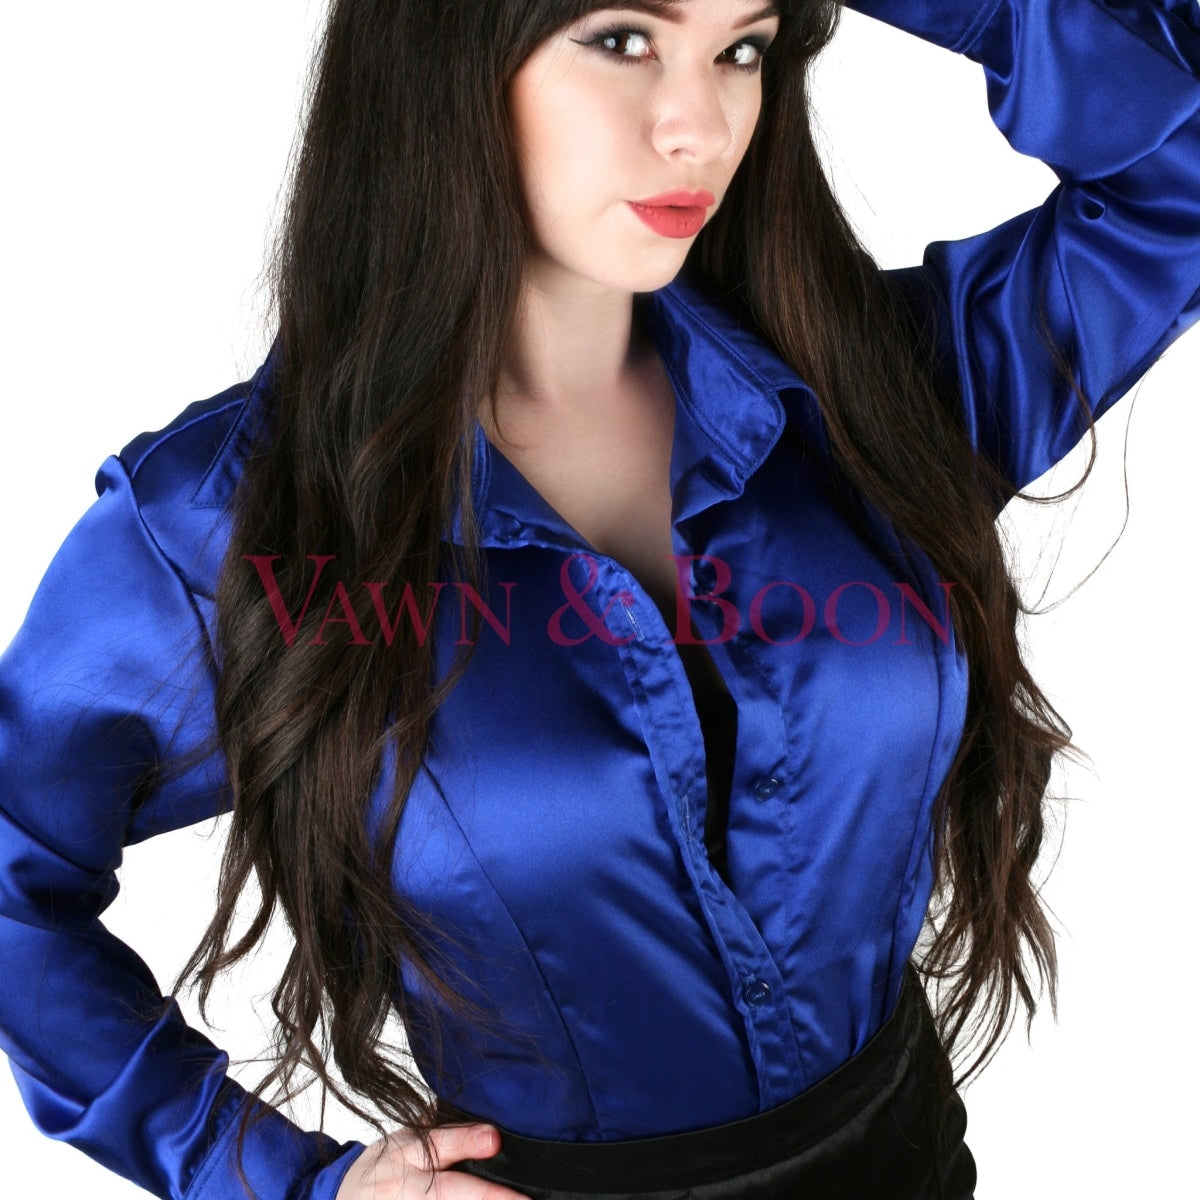 Blue Satin Blouse – Vawn and Boon